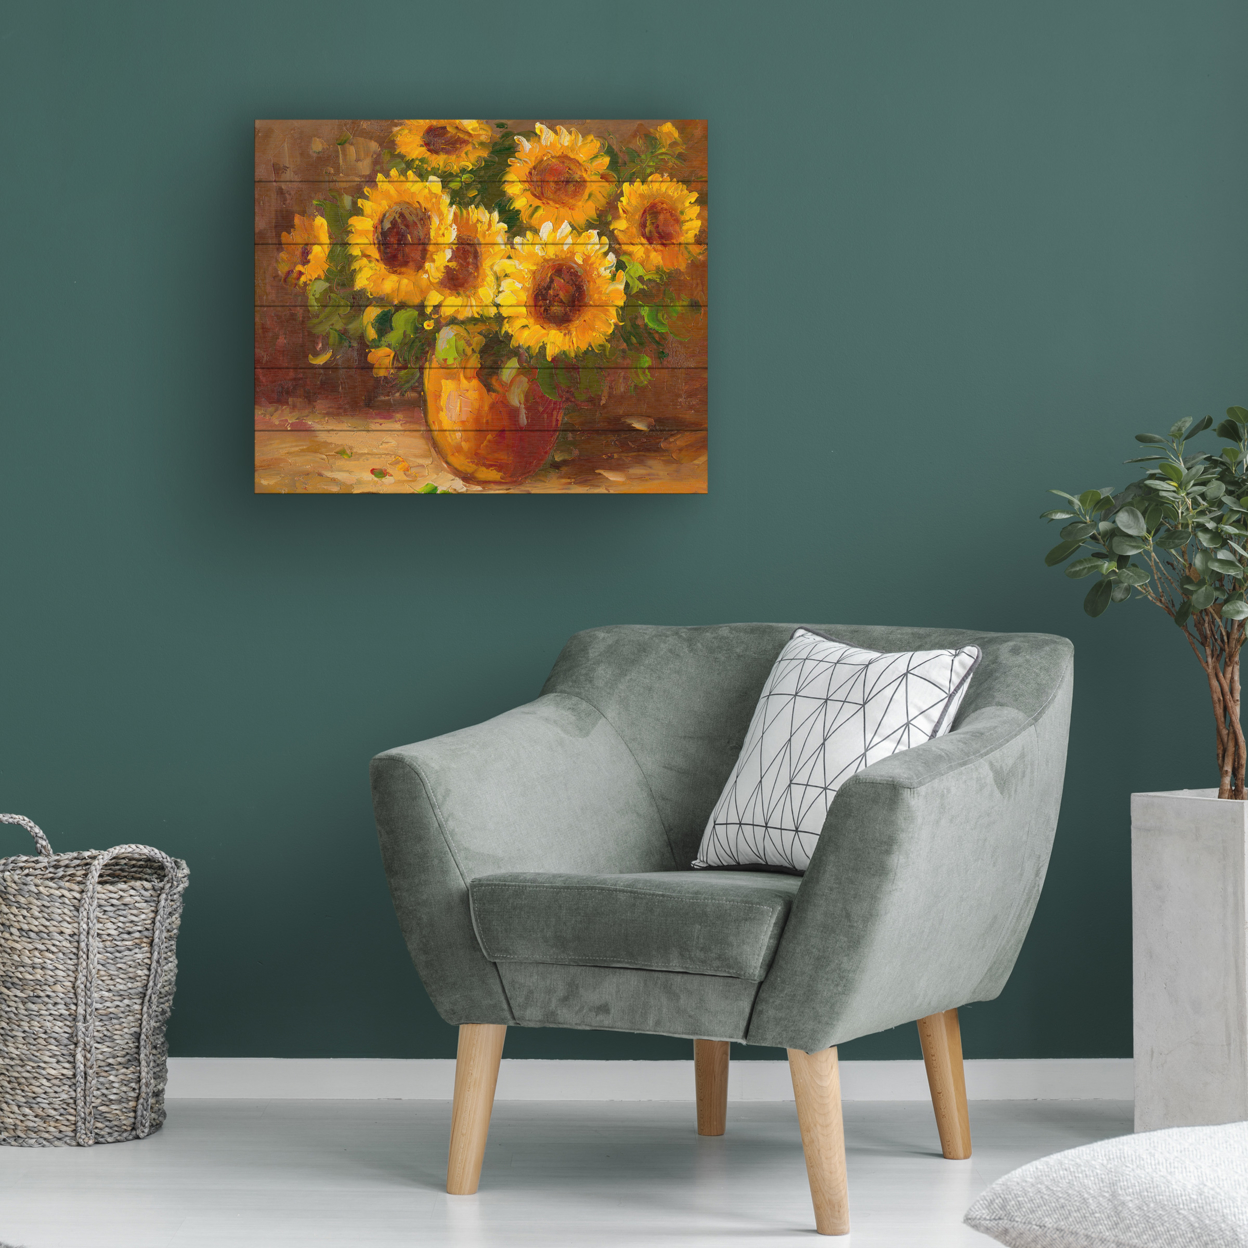 Wooden Slat Art 18 X 22 Inches Titled Sunflowers Still Life Ready To Hang Home Decor Picture